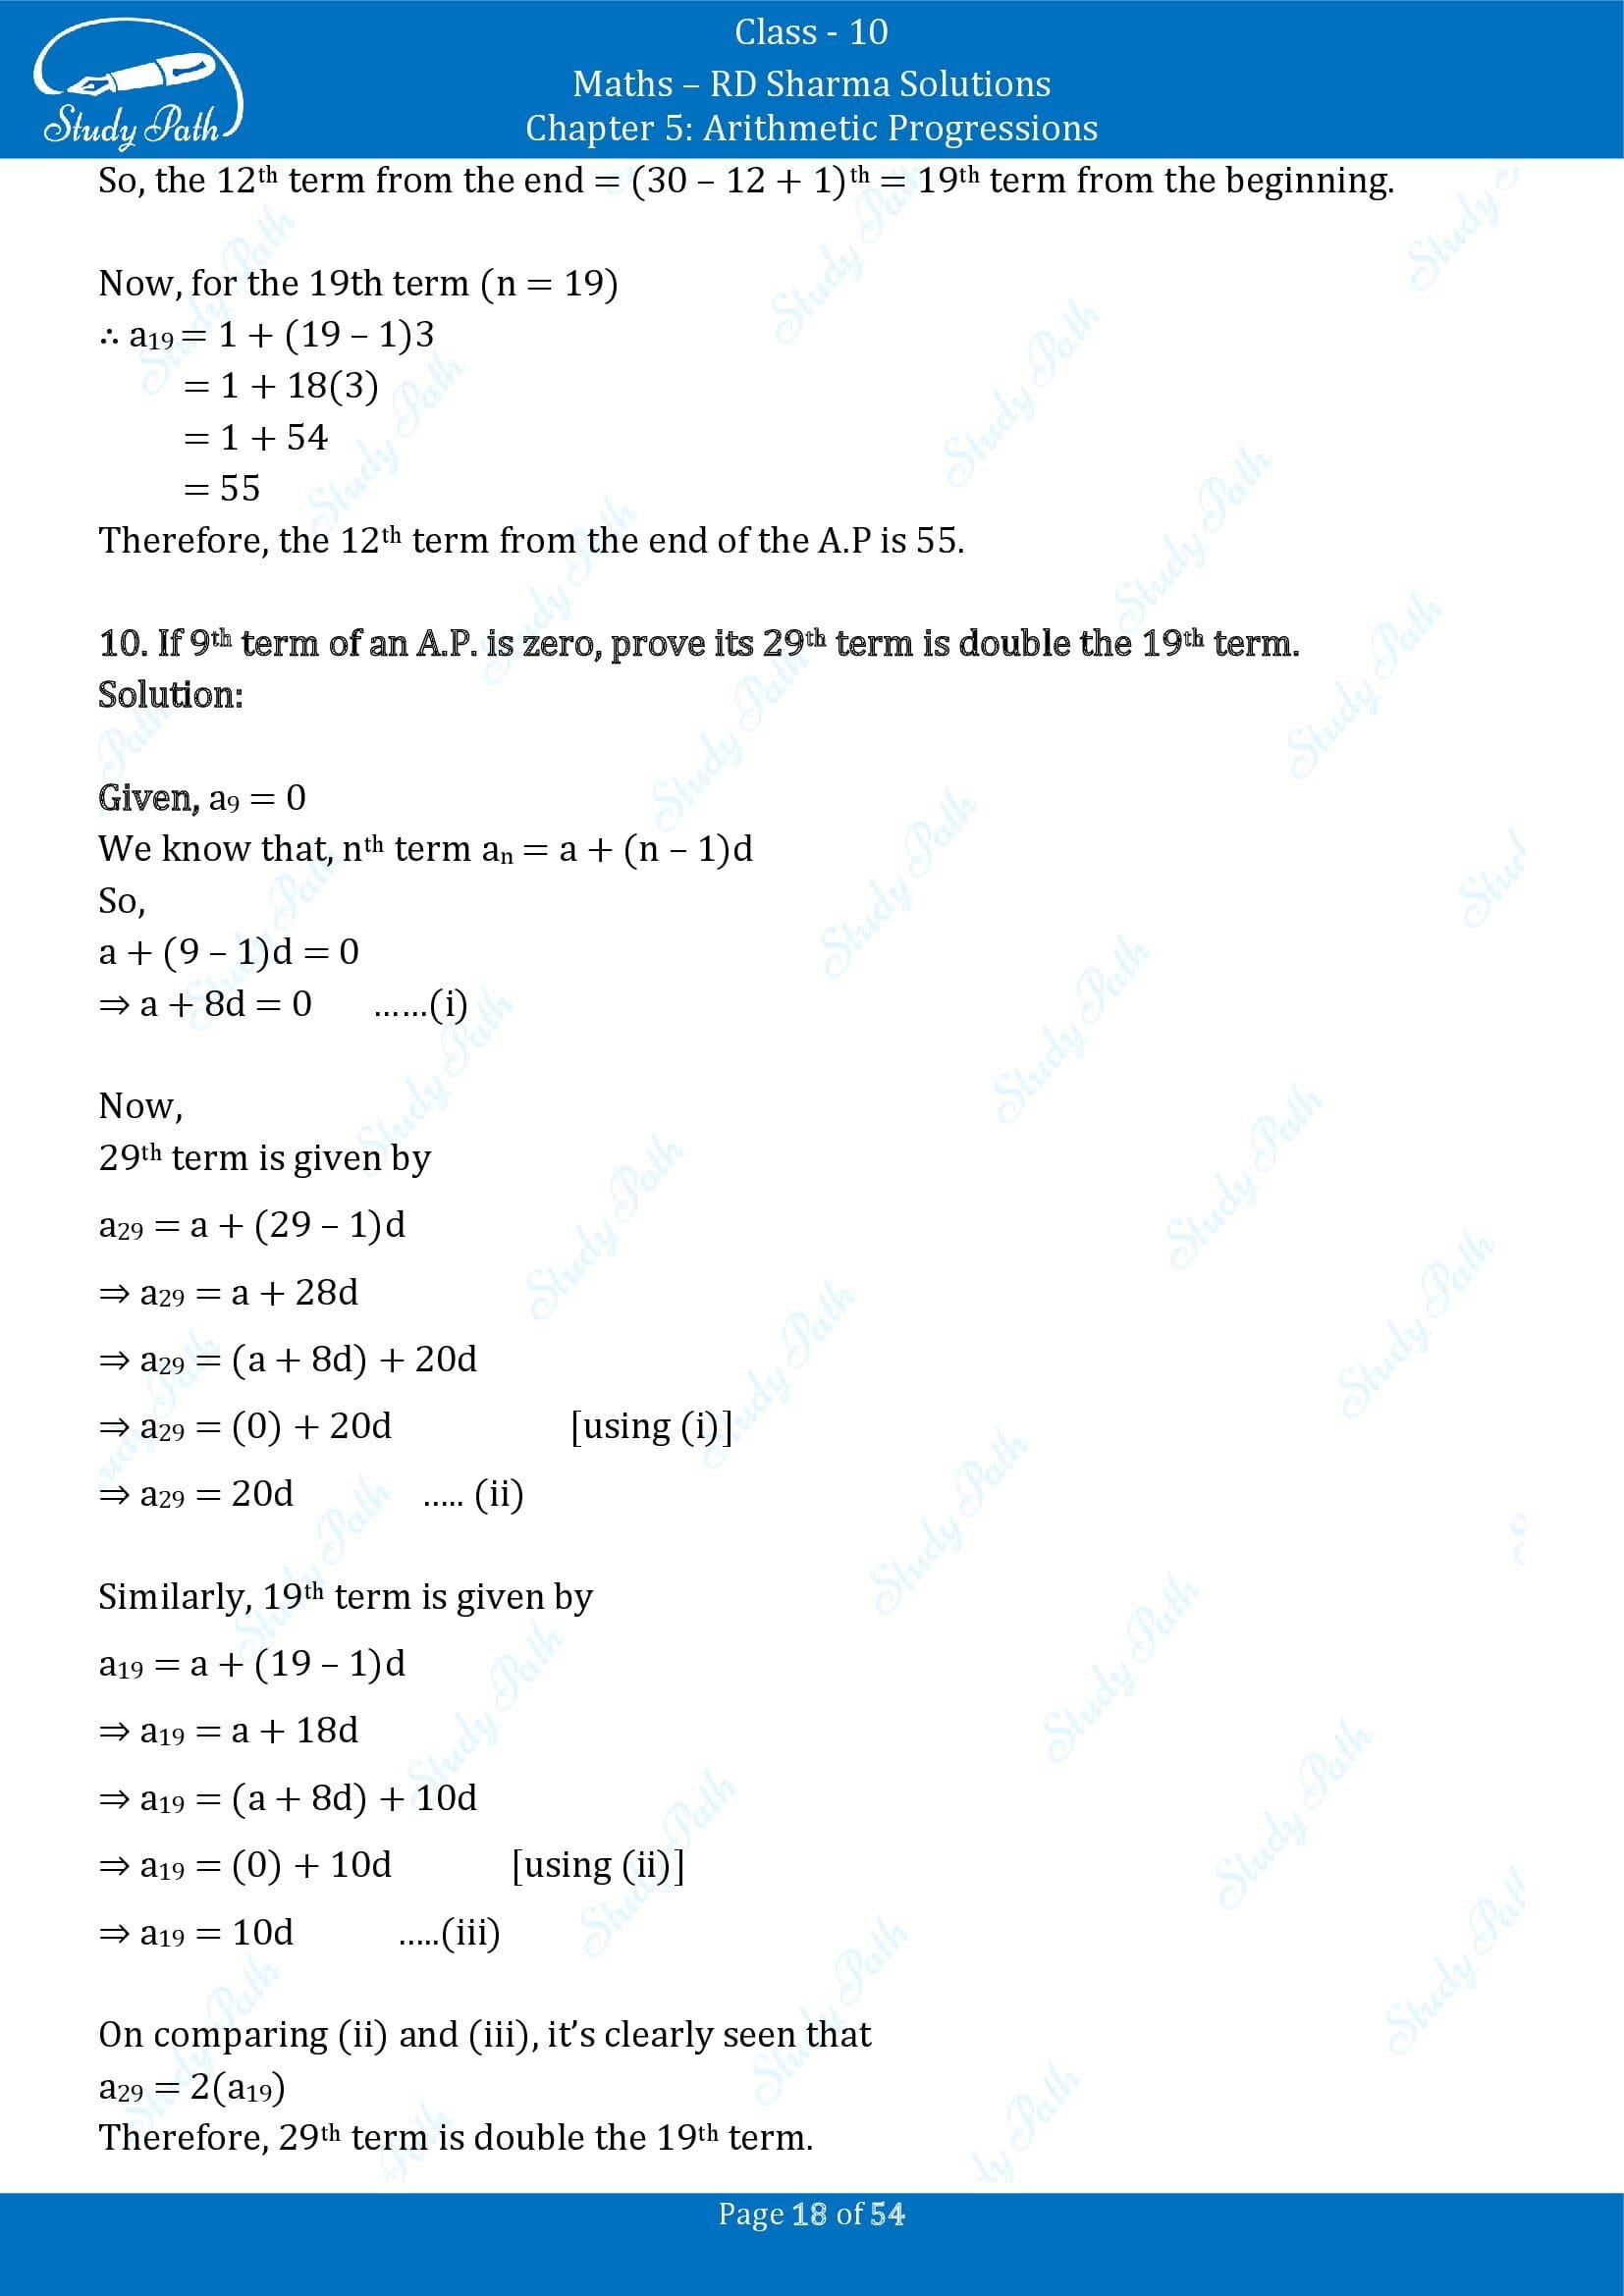 RD Sharma Solutions Class 10 Chapter 5 Arithmetic Progressions Exercise 5.4 00018